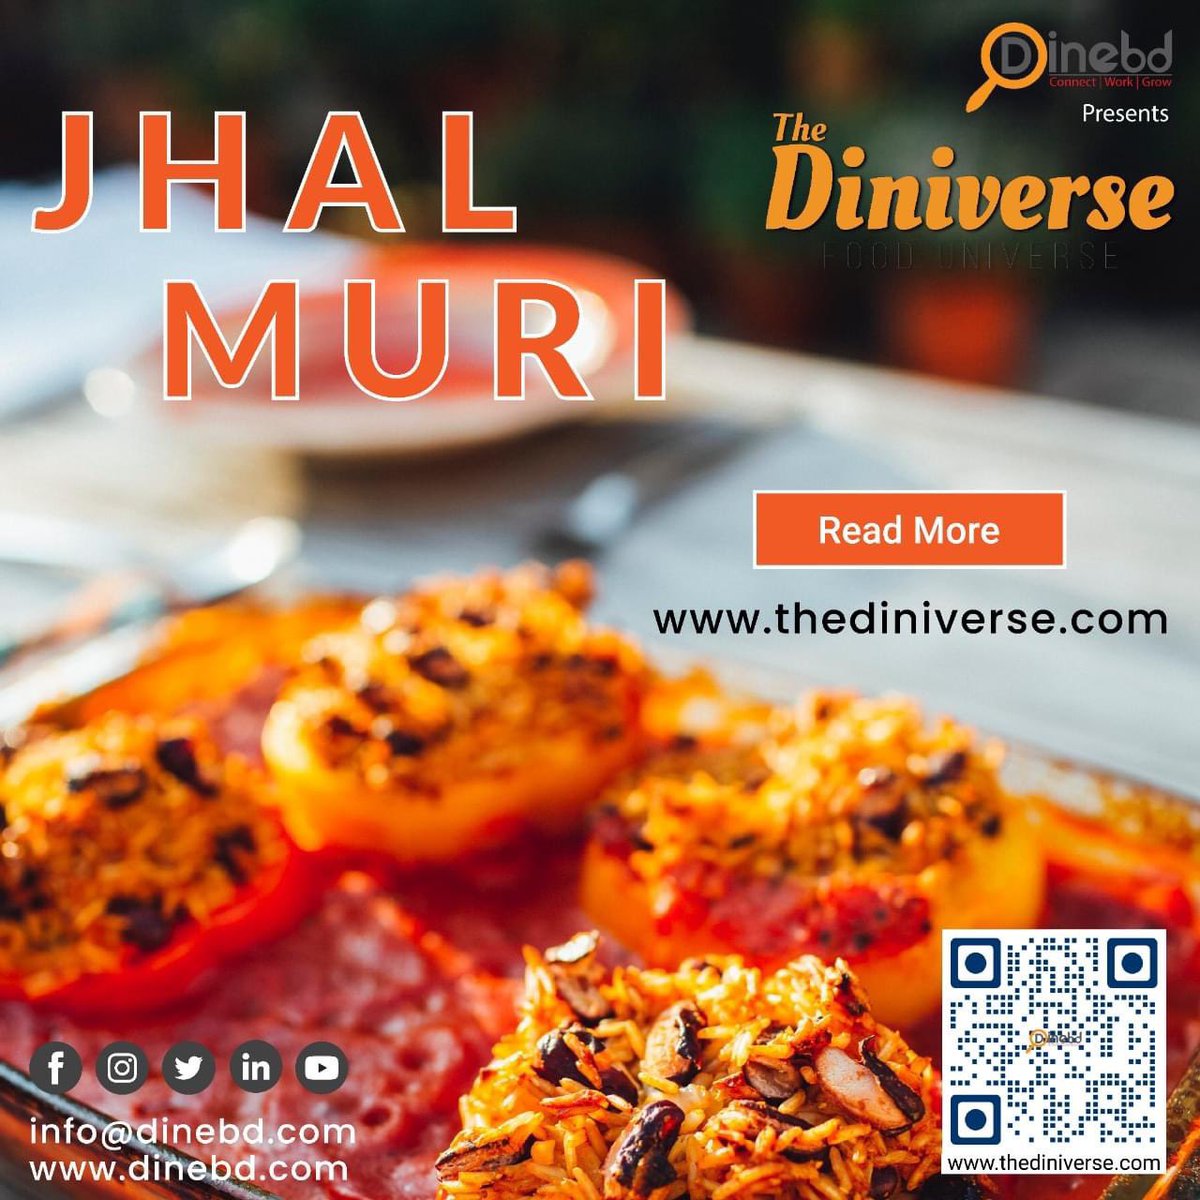 Jhalmuri is a common street food in Bangladesh. To learn more about this mouthwatering street food visit: thediniverse.com 
Page no: 110 & 111 (December edition) 

#Jhalmuri #popularstreetfood #dinebd #thediniverse #fooduniverse